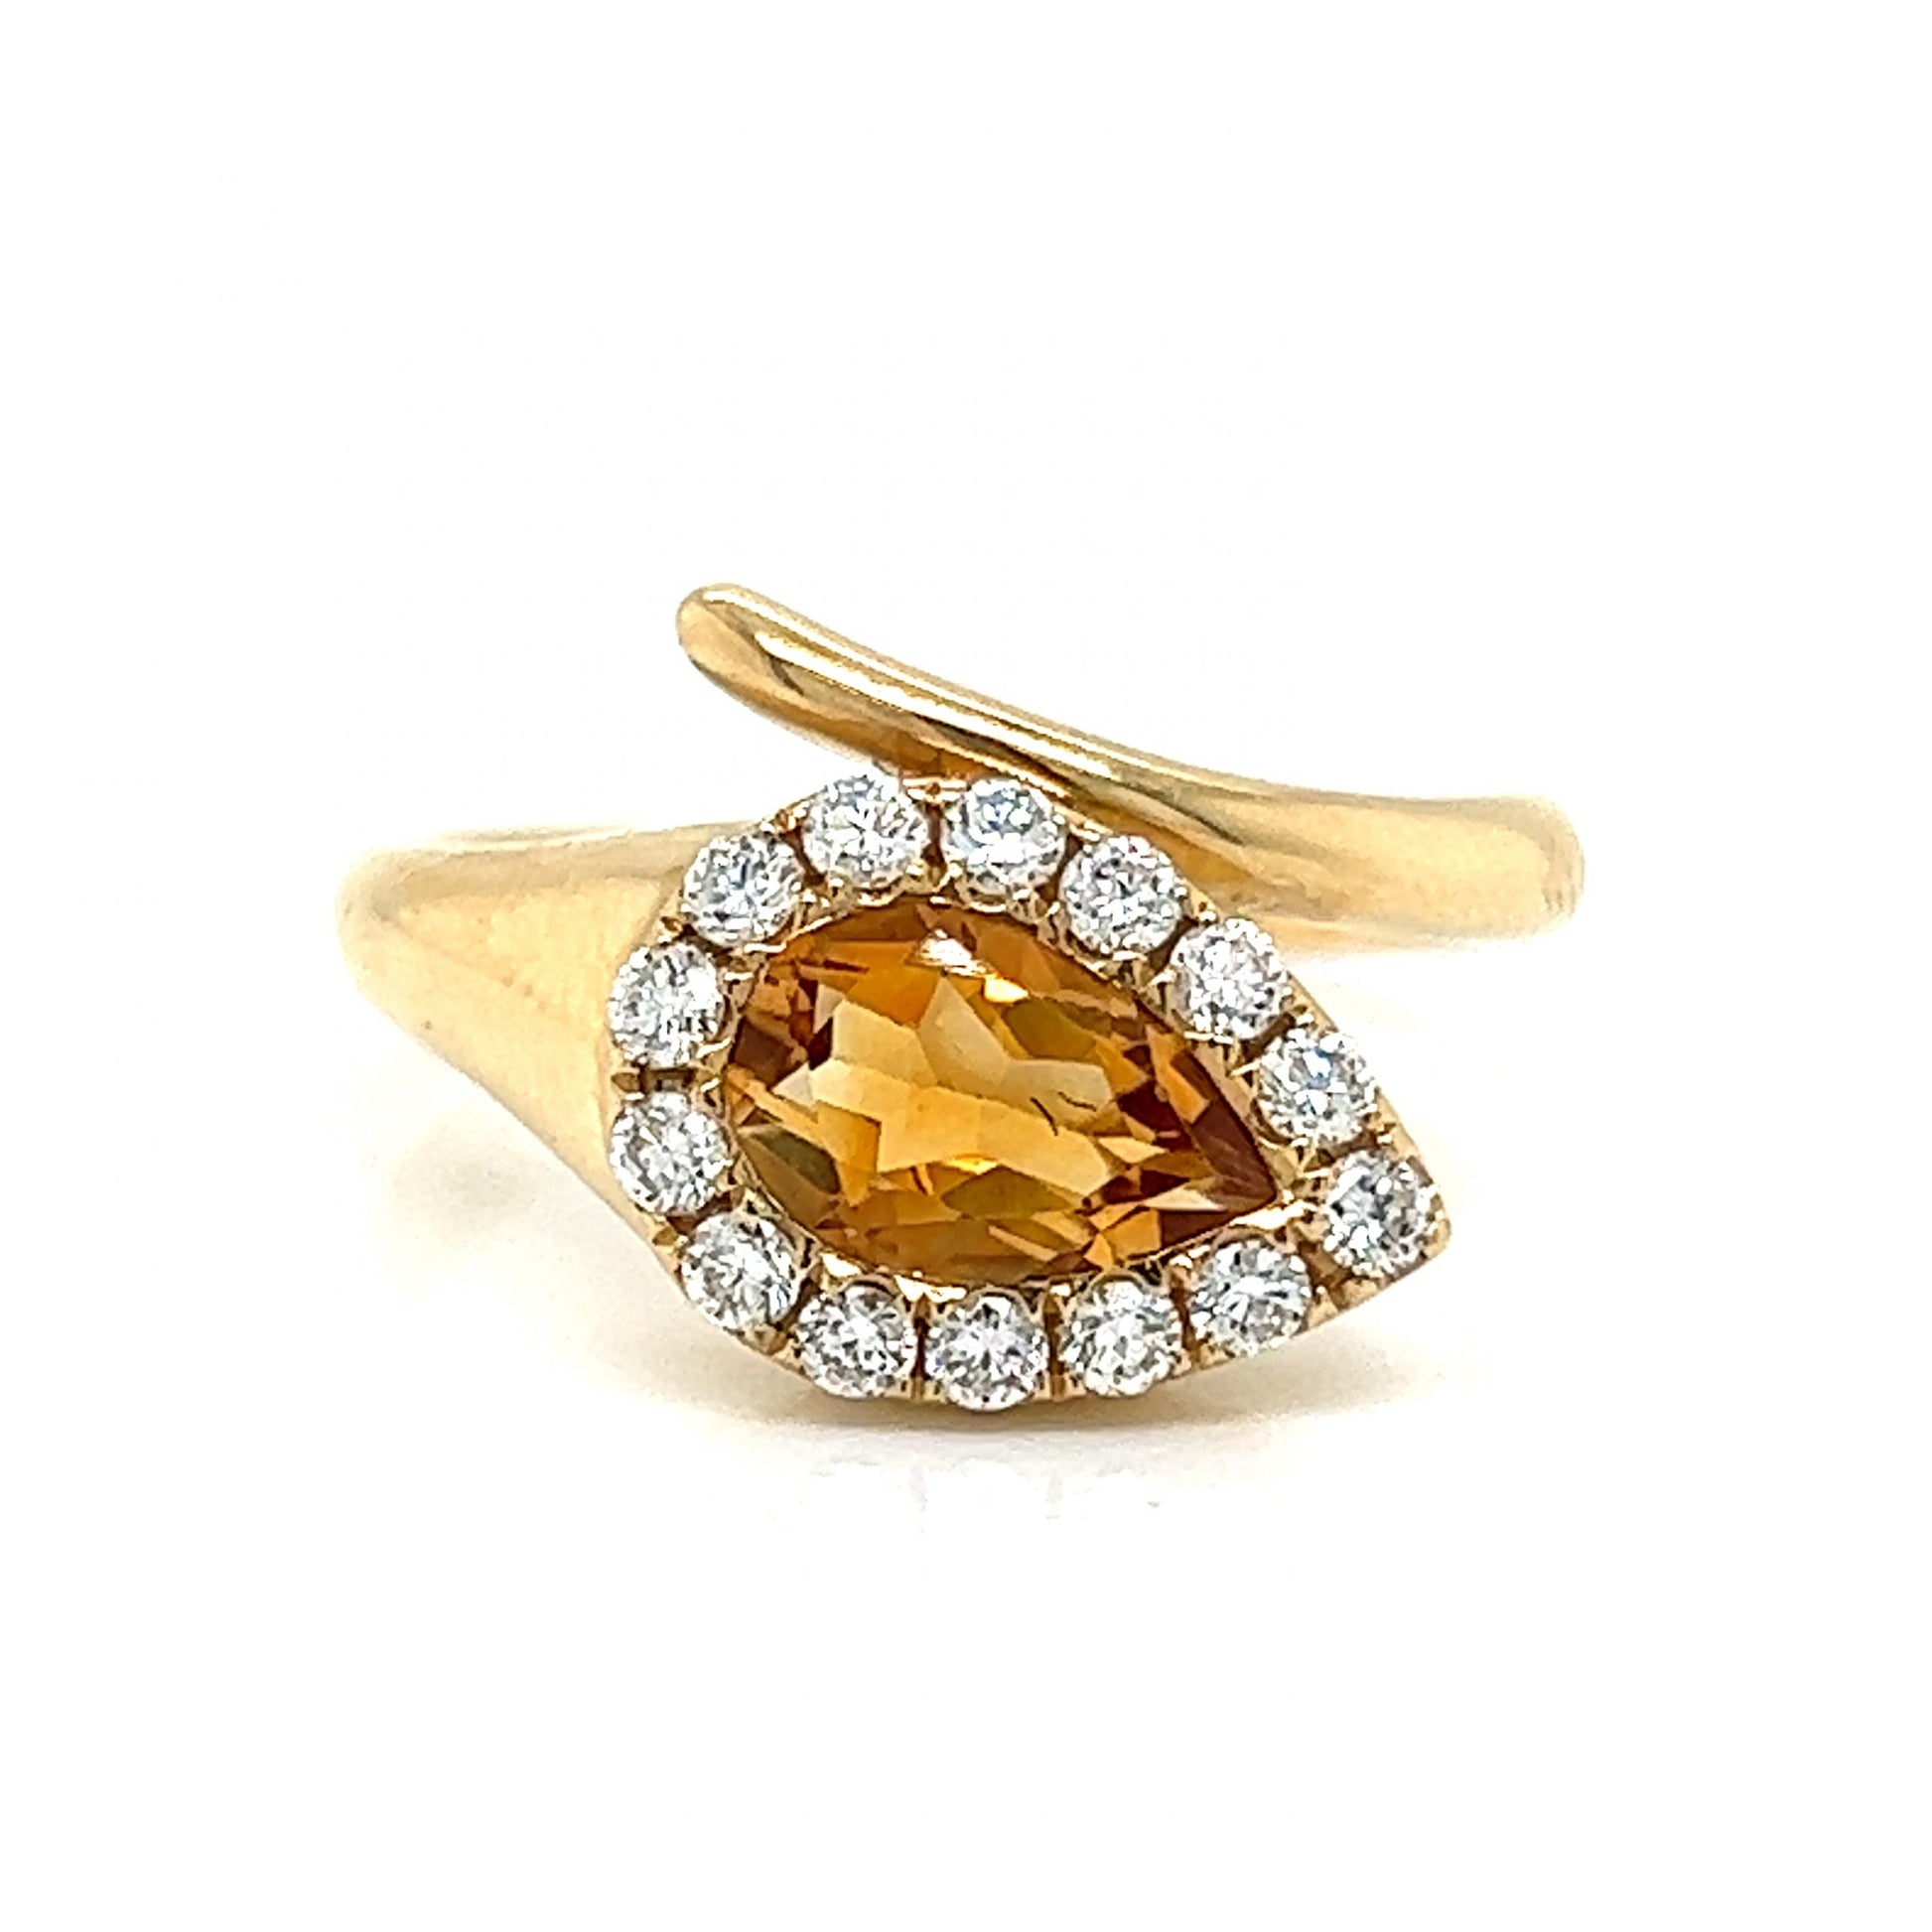 Citrine & Diamond Snake Shaped Ring in 14k Yellow GoldComposition: 14 Karat Yellow Gold Ring Size: 7 Total Diamond Weight: .38ct Total Gram Weight: 4.7 g Inscription: 14KY 129159 D0.38 0.99
      